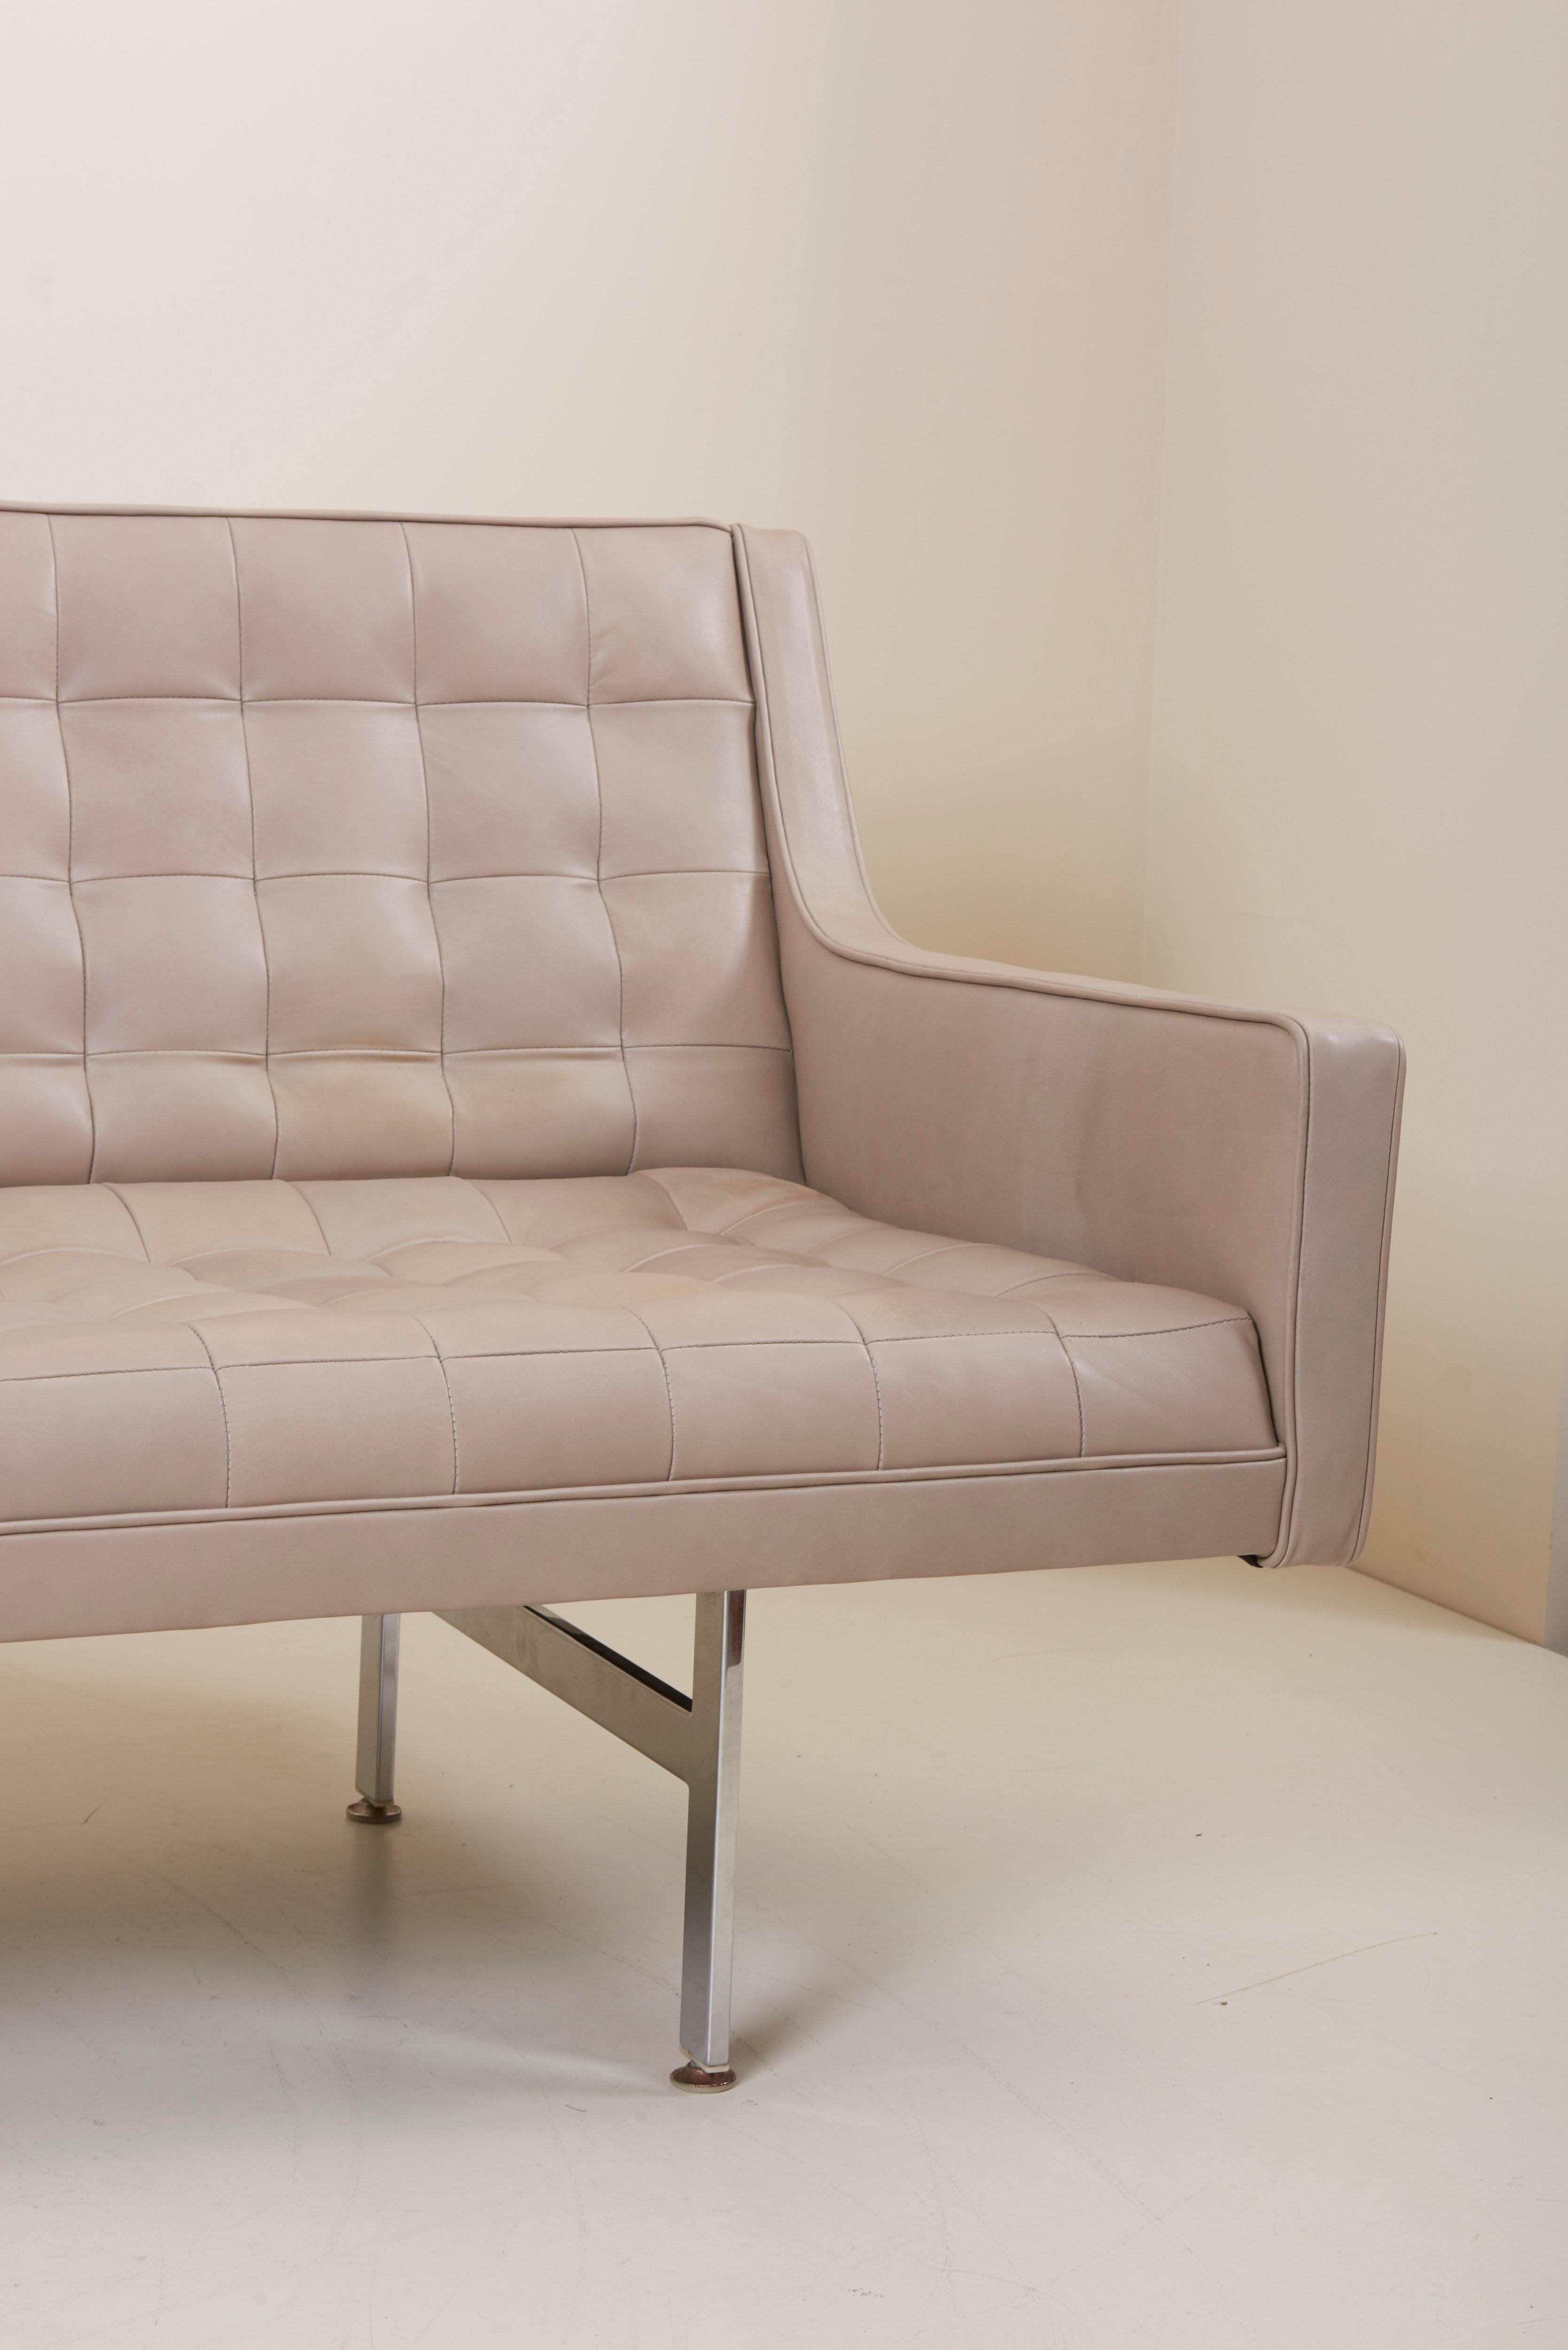 20th Century Tufted Sofa in Grey Leather by Milo Baughman for Thayer Coggin